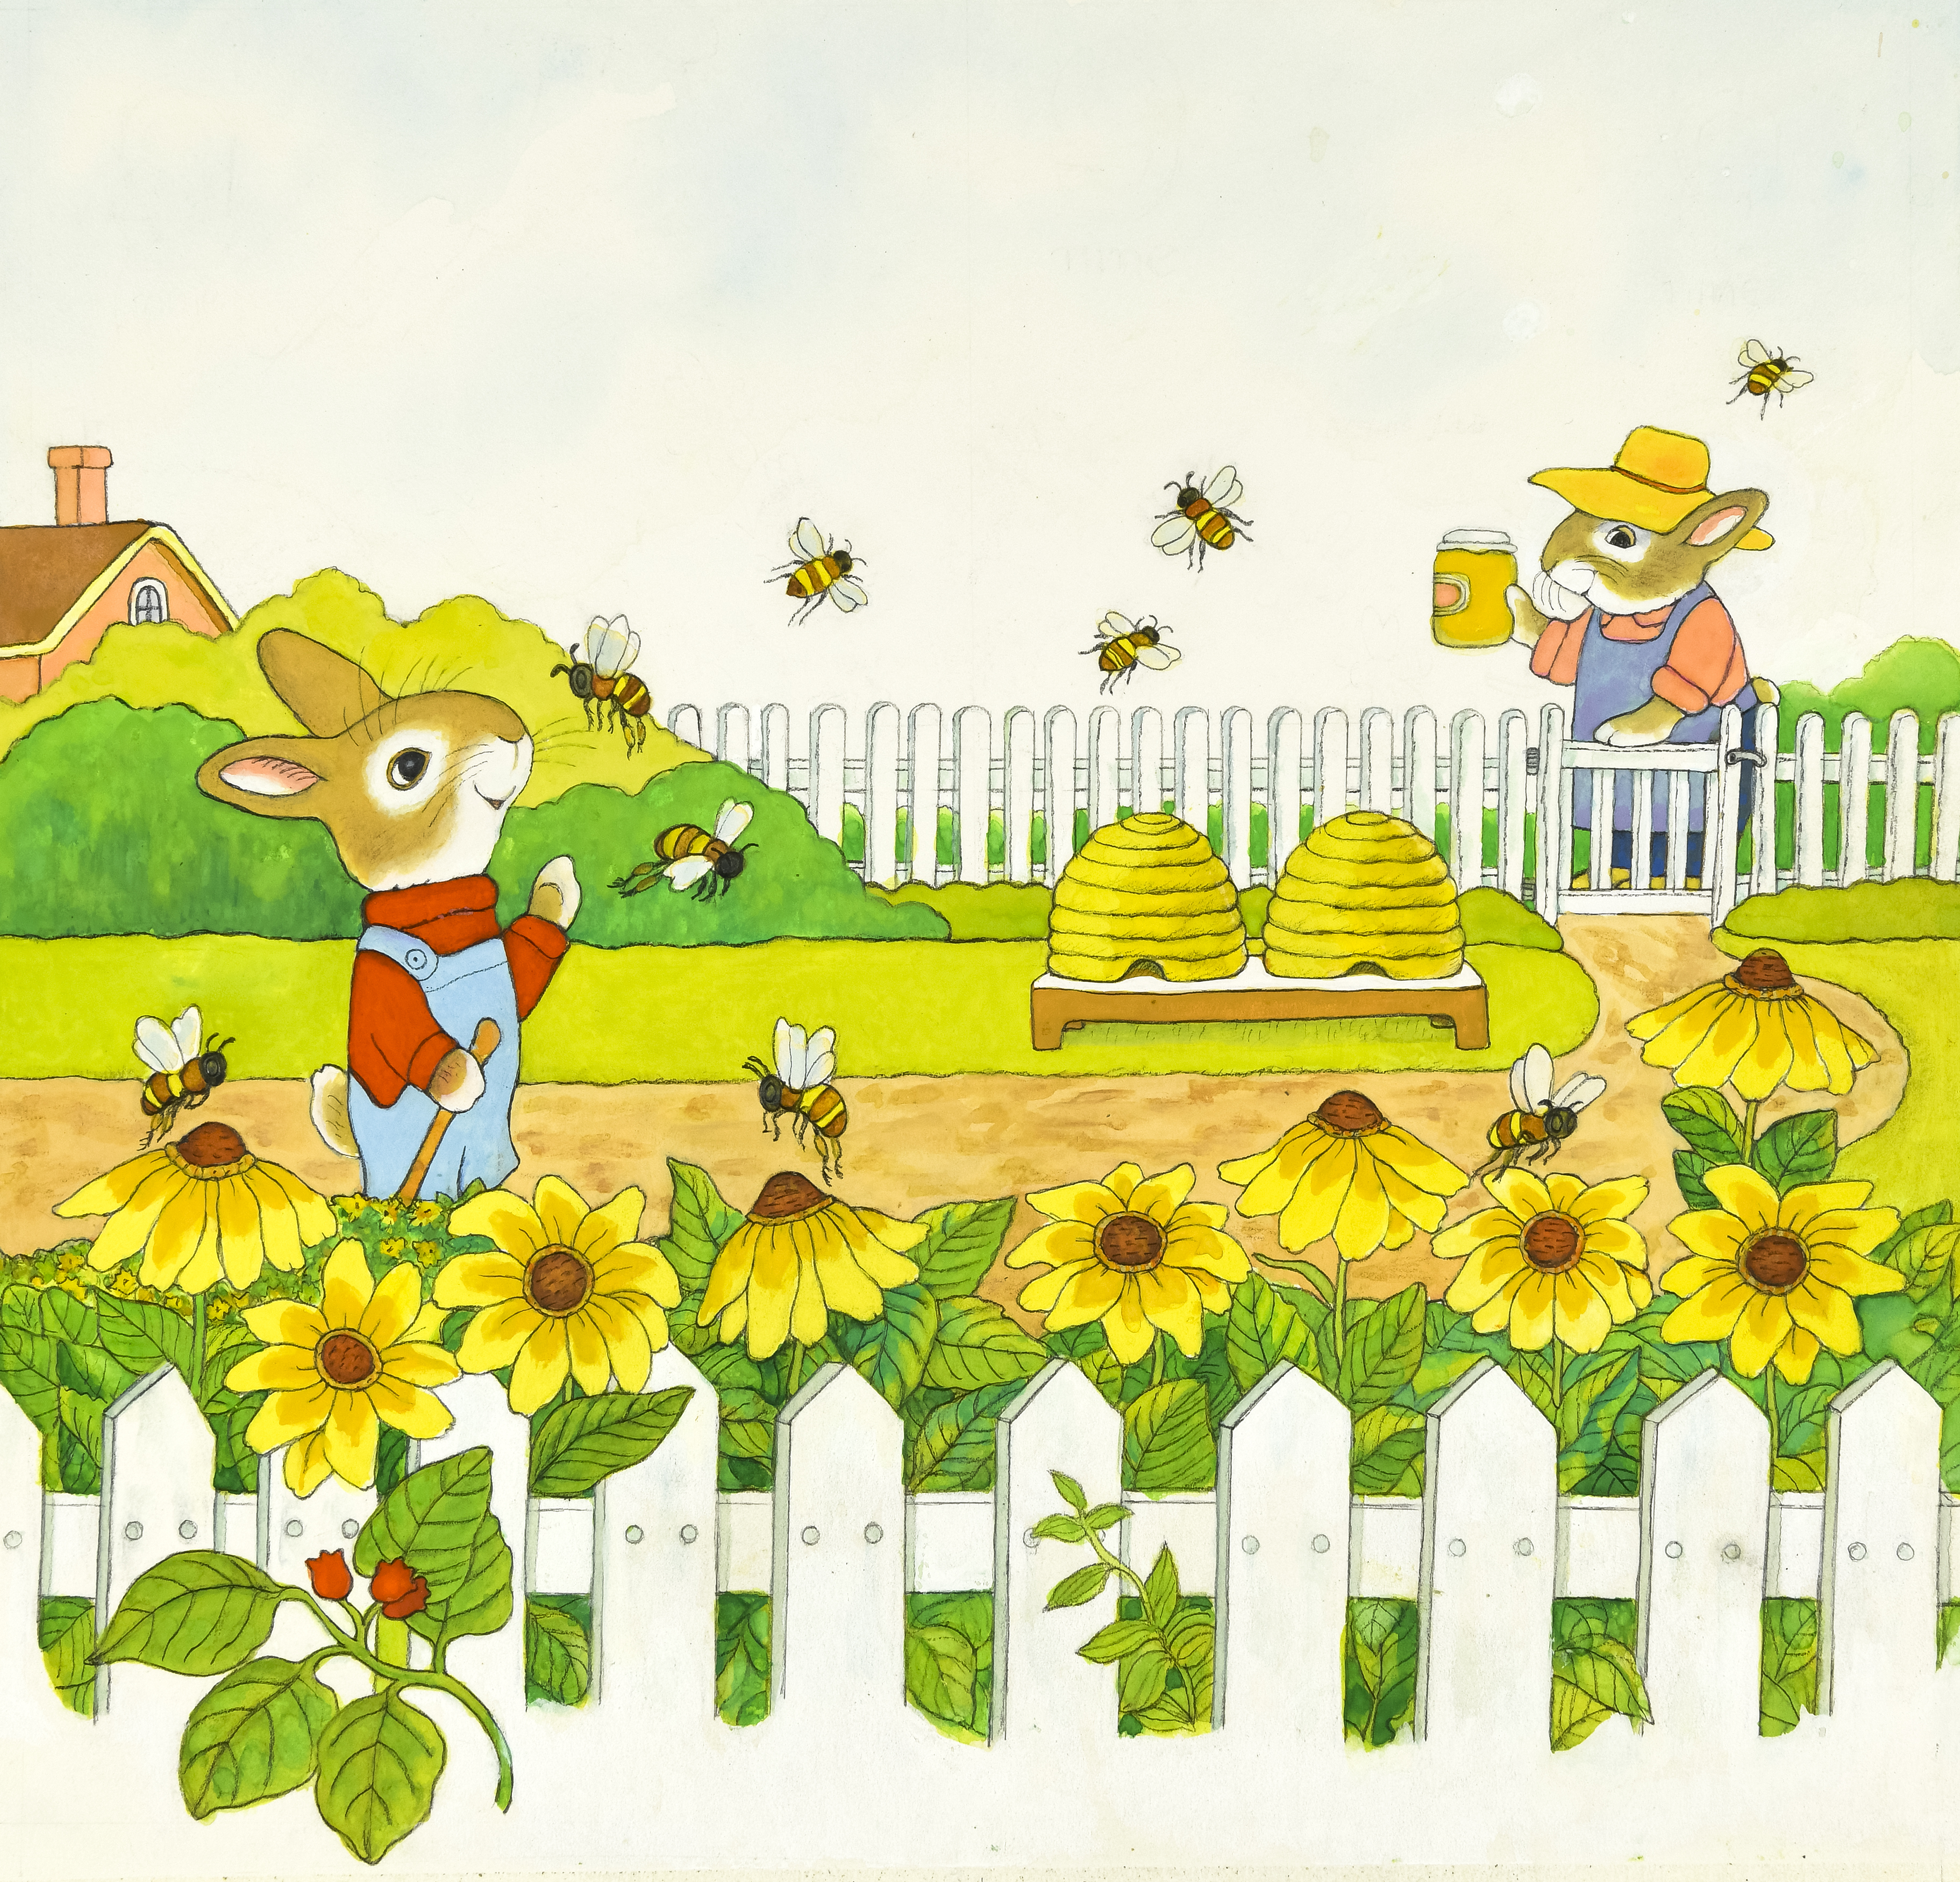 Illustration of rabbit with sunflowers and honey bees.